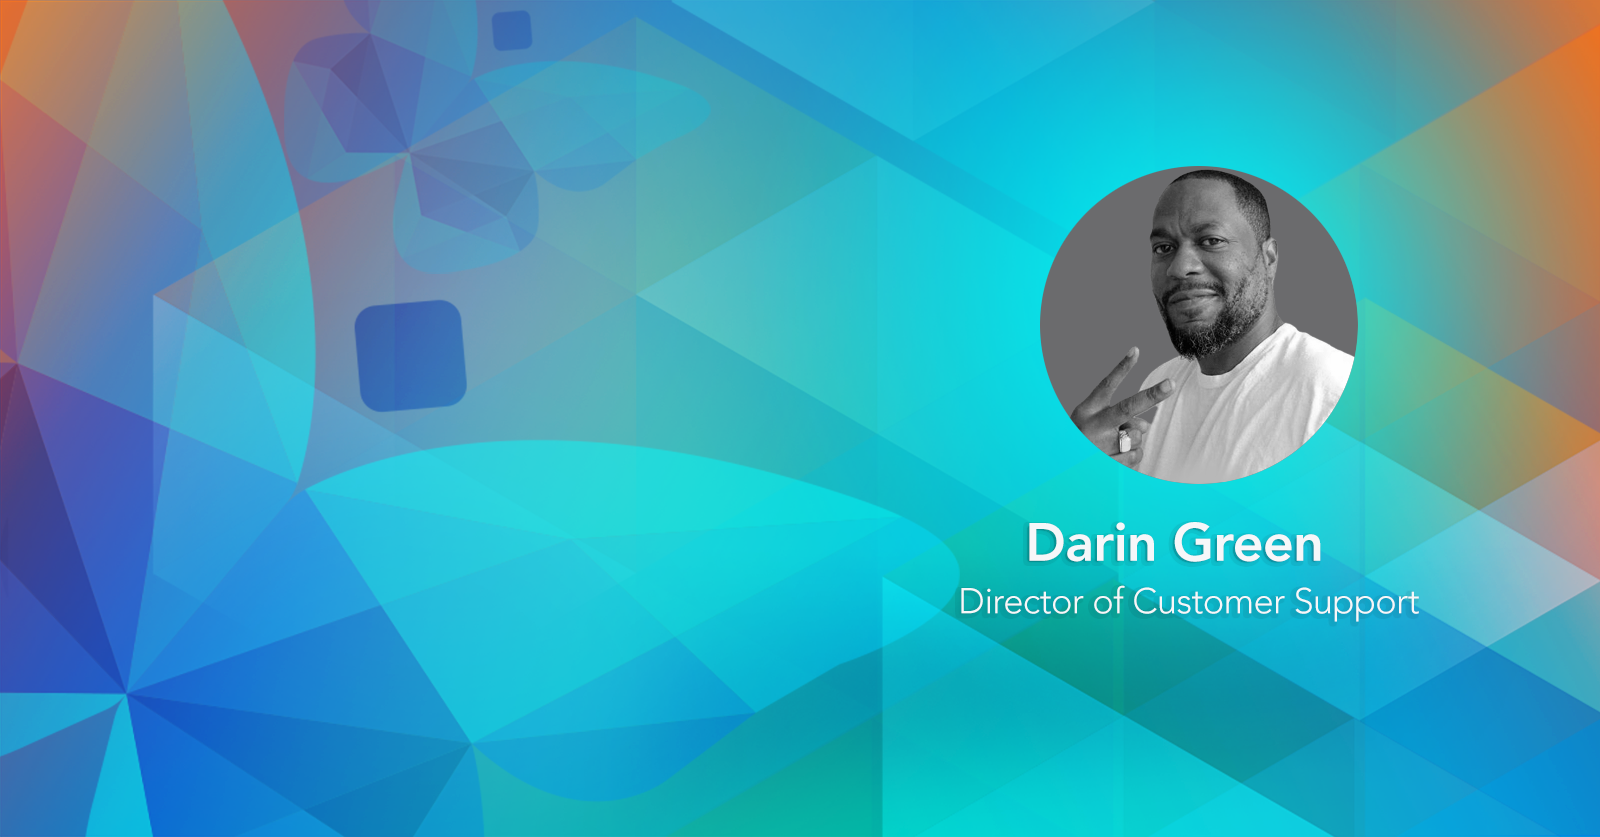 Darin Green - Happiness comes from helping others